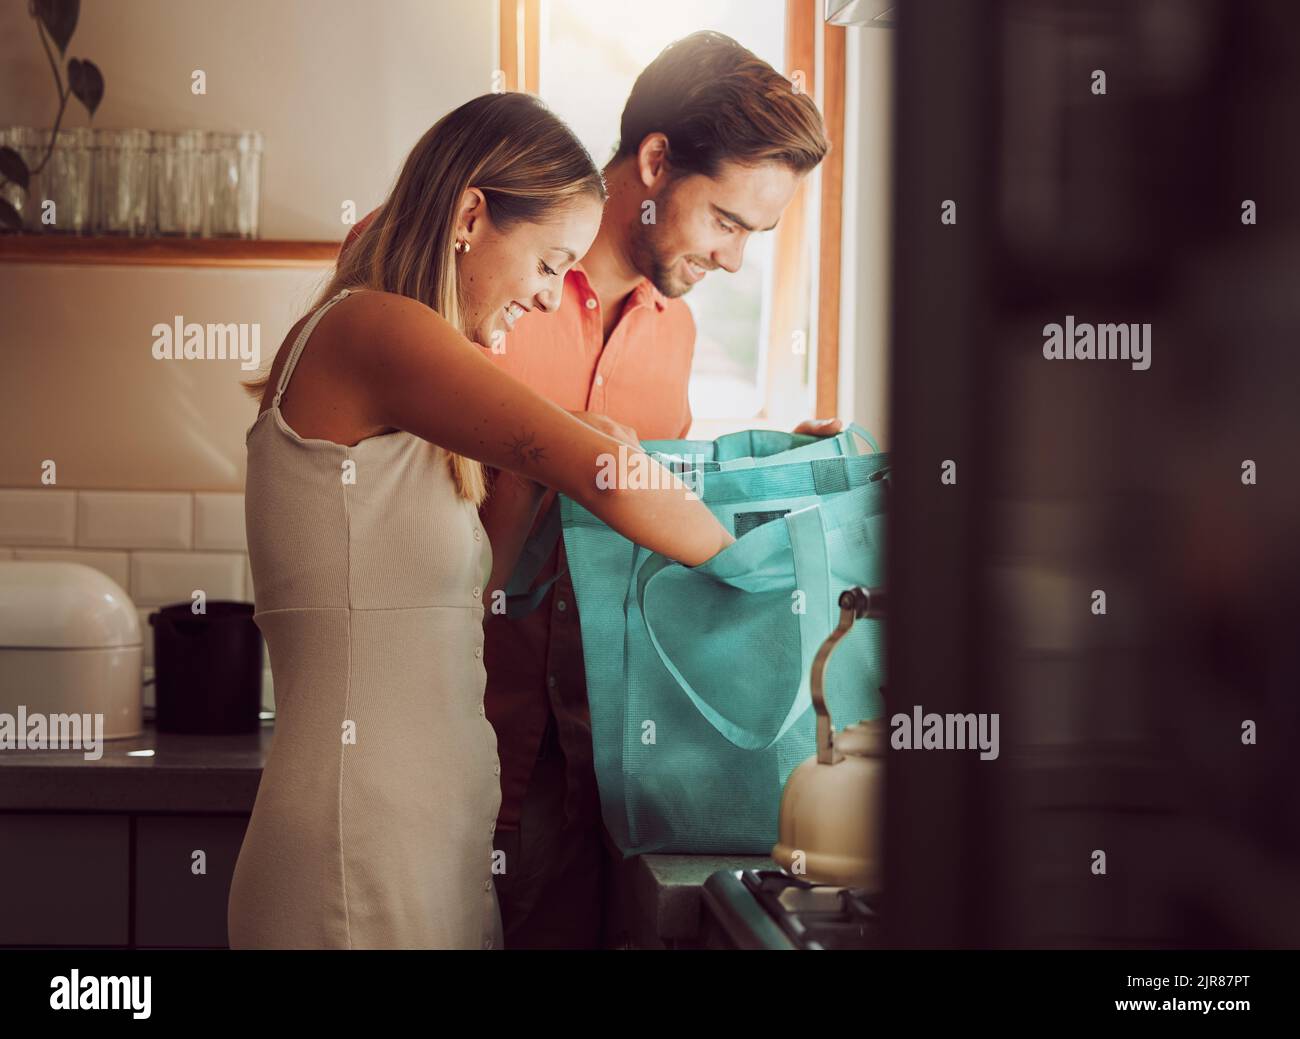 Couple home after grocery shopping at supermarket store. Retail consumer, sustainable shopper and young people unpacking and checking food products Stock Photo